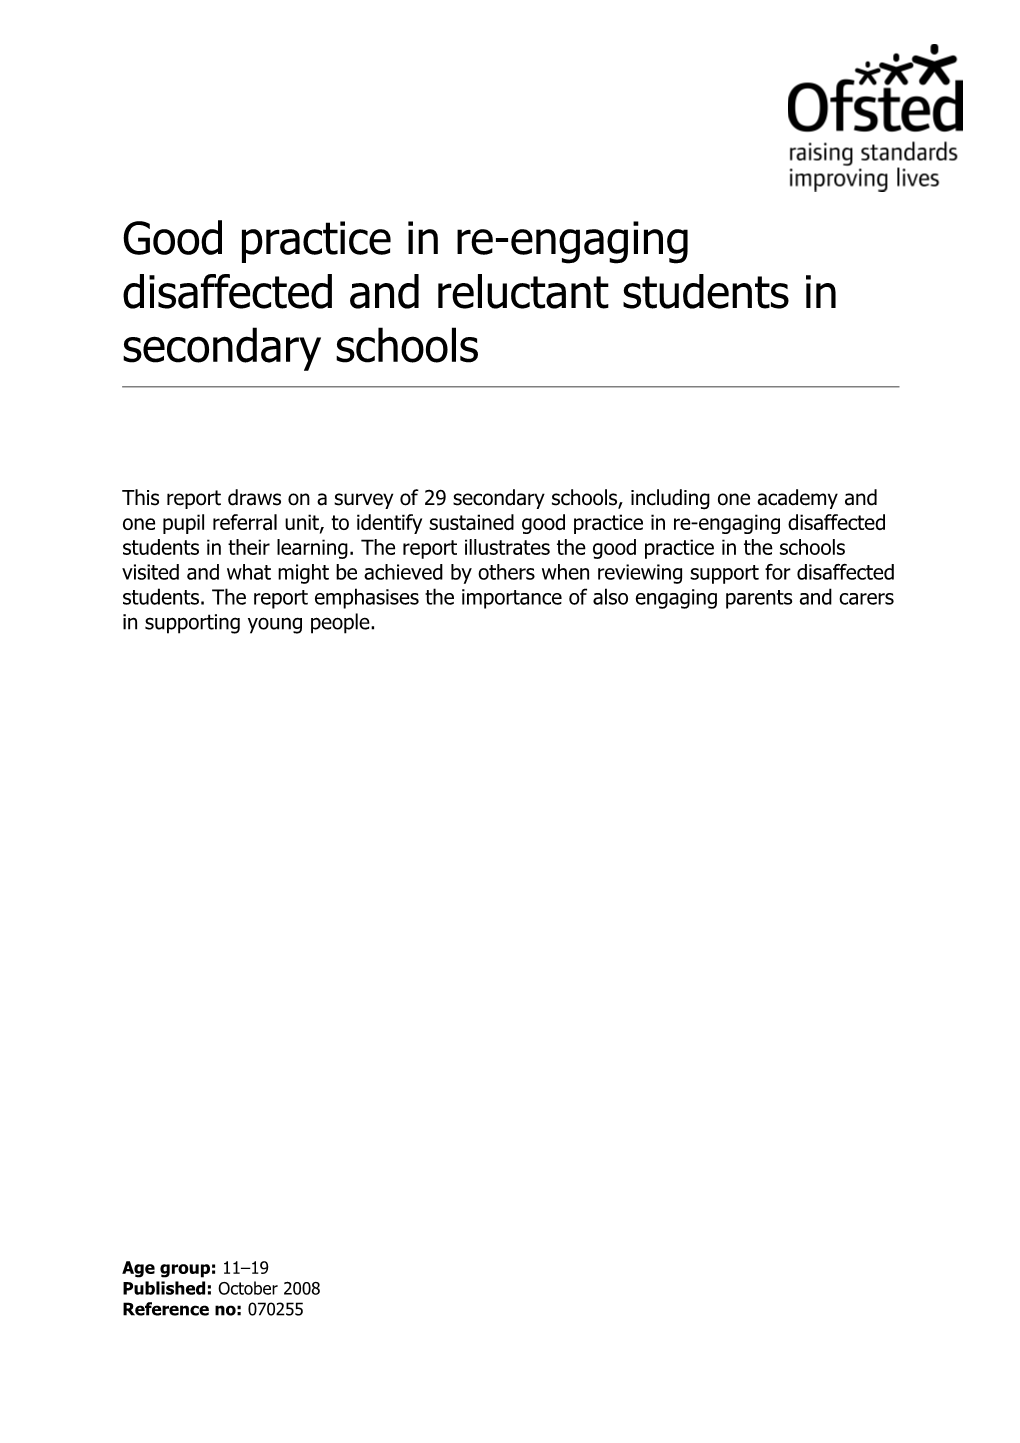 Good Practice in Re-Engaging Disaffected and Reluctant Students in Secondary Schools